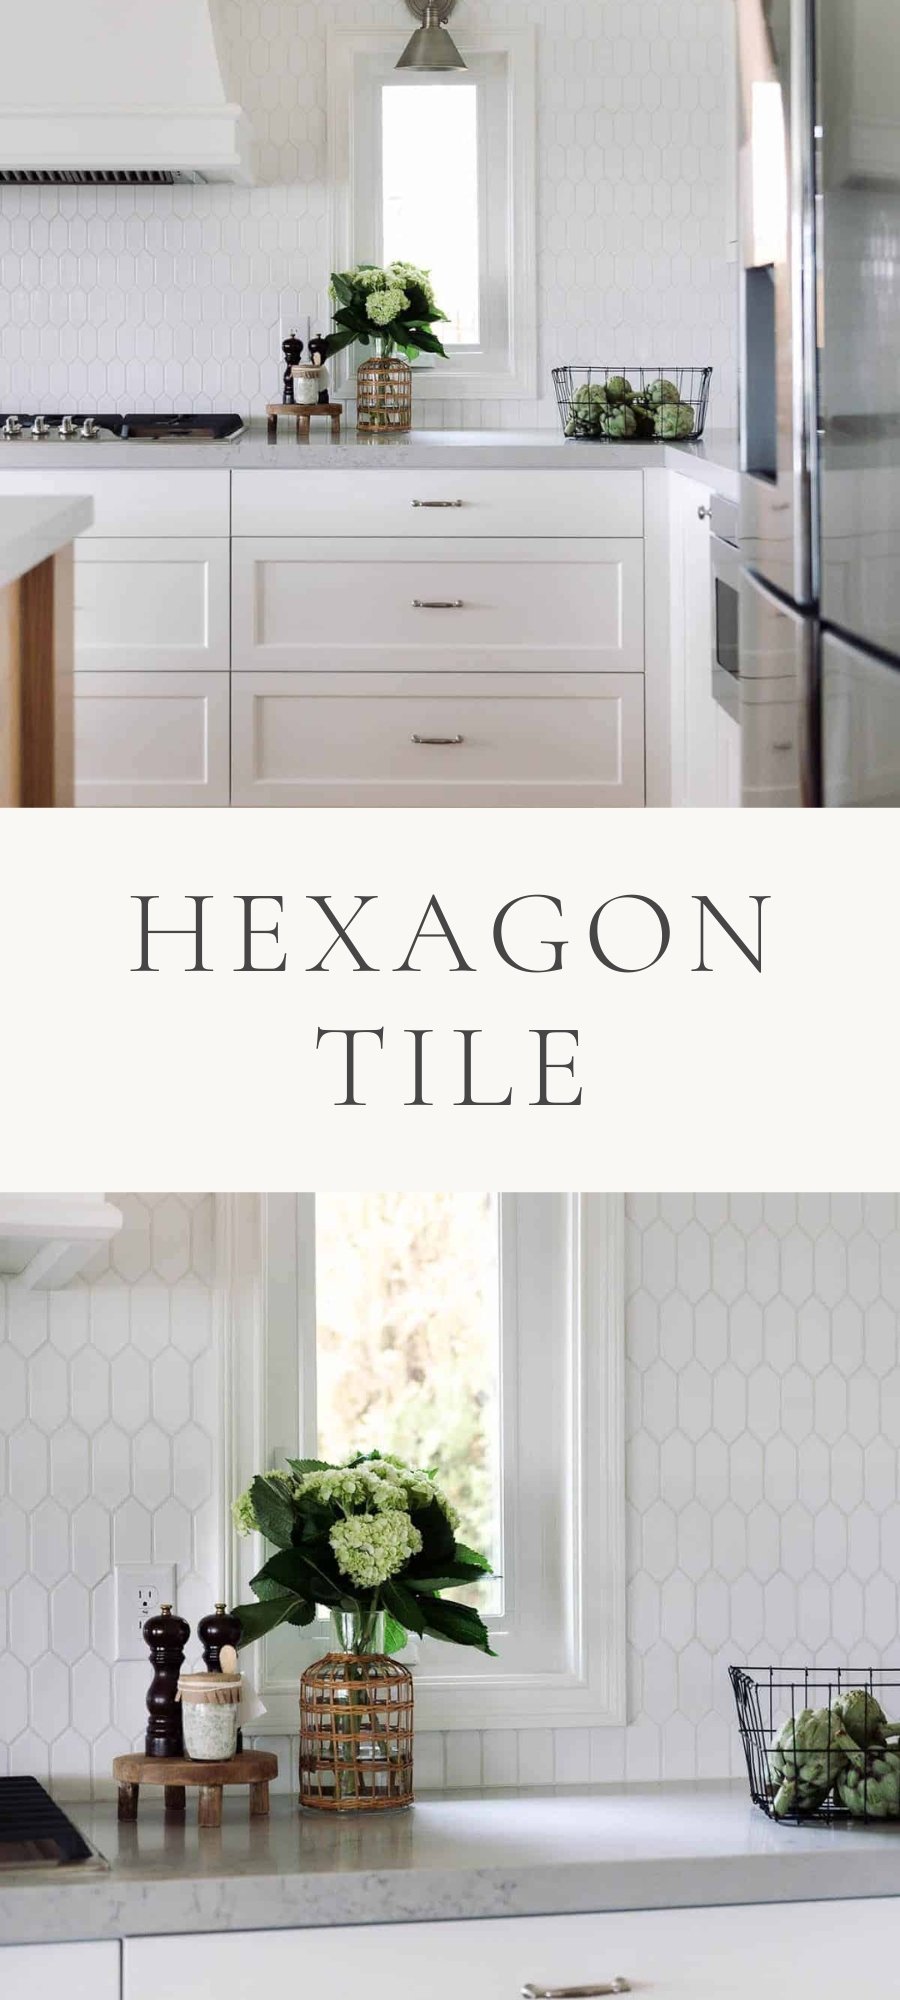 a kitchen with white drawers plants decor and hexagon tile